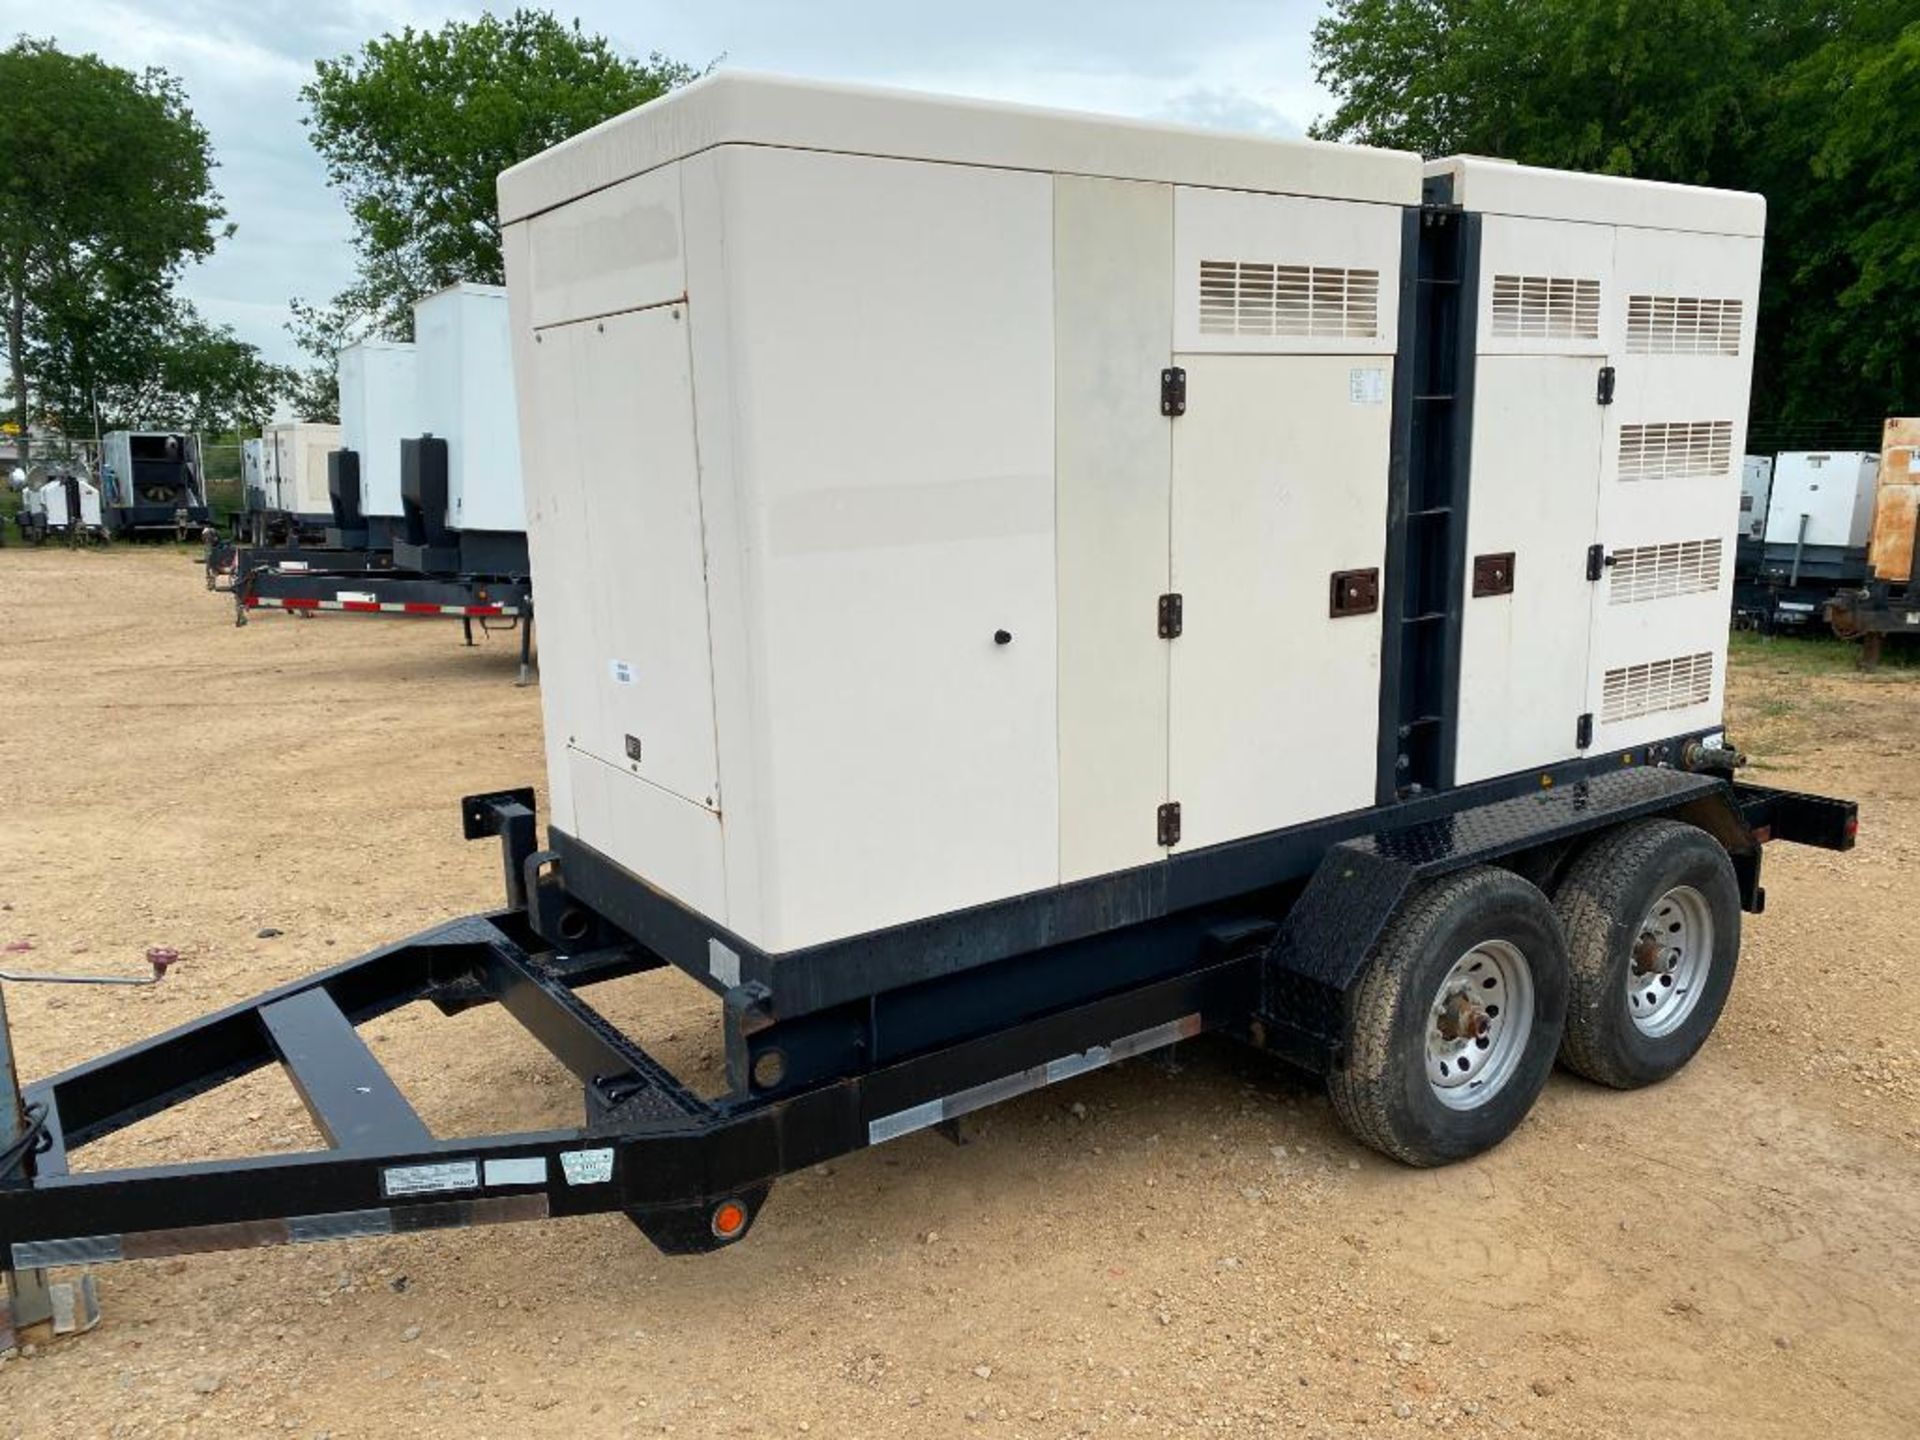 2014 AltaStream Power Systems 125 KVA Towable Generator, Dual Fuel Natural Gas or LP, Model APHG150- - Image 4 of 14